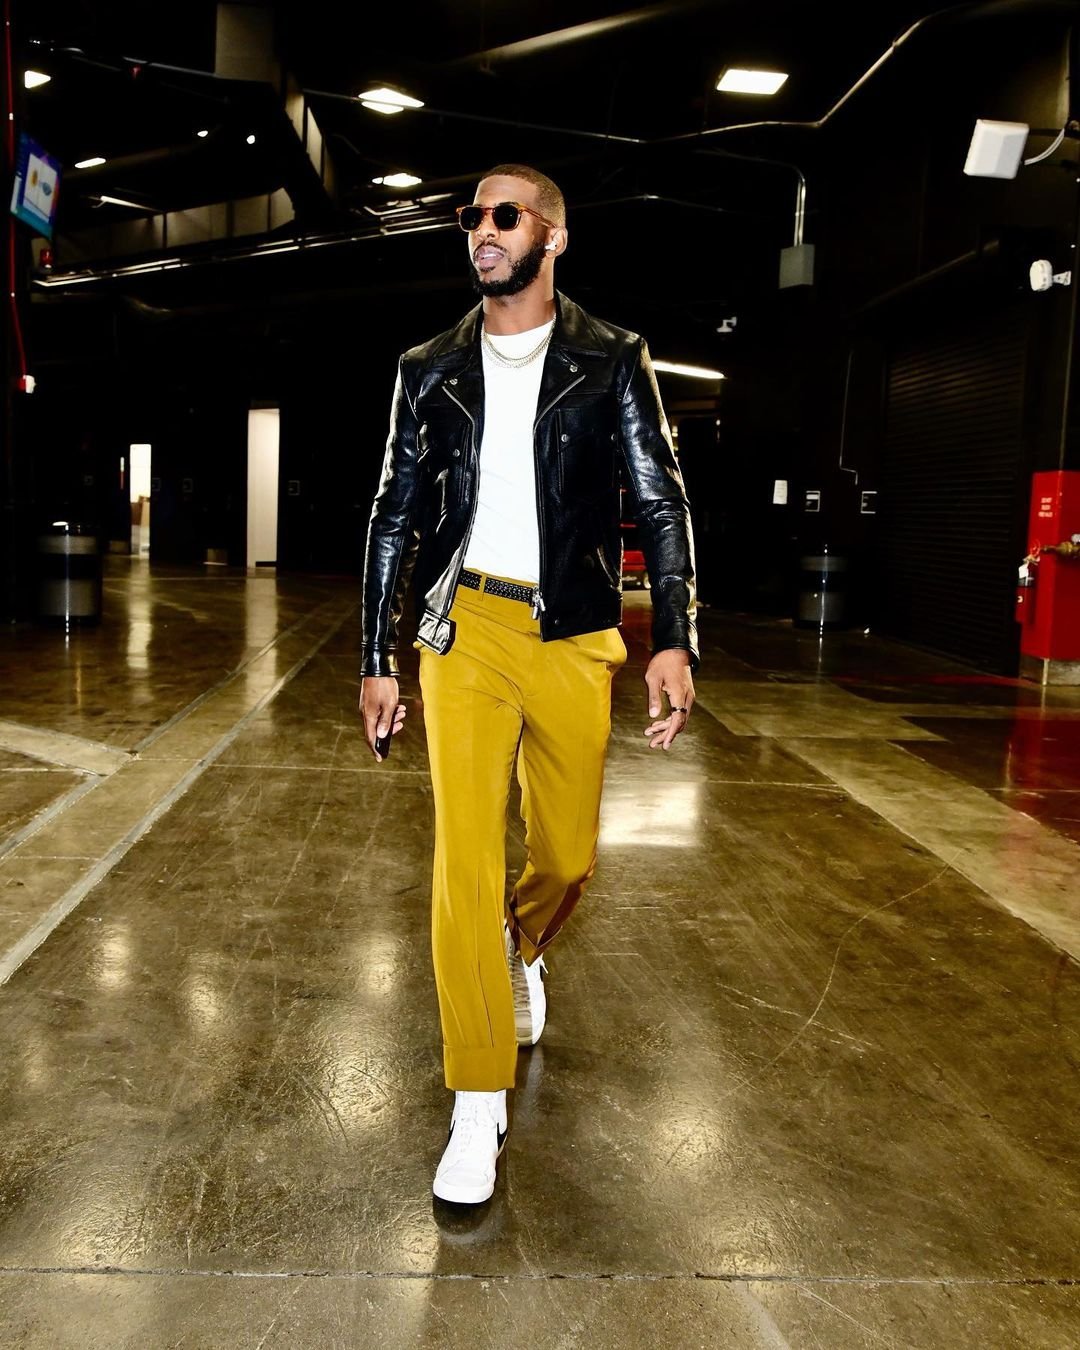 DeAndre Jordan's Stylist Courtney Mays on the Latest Trends // ONE37pm